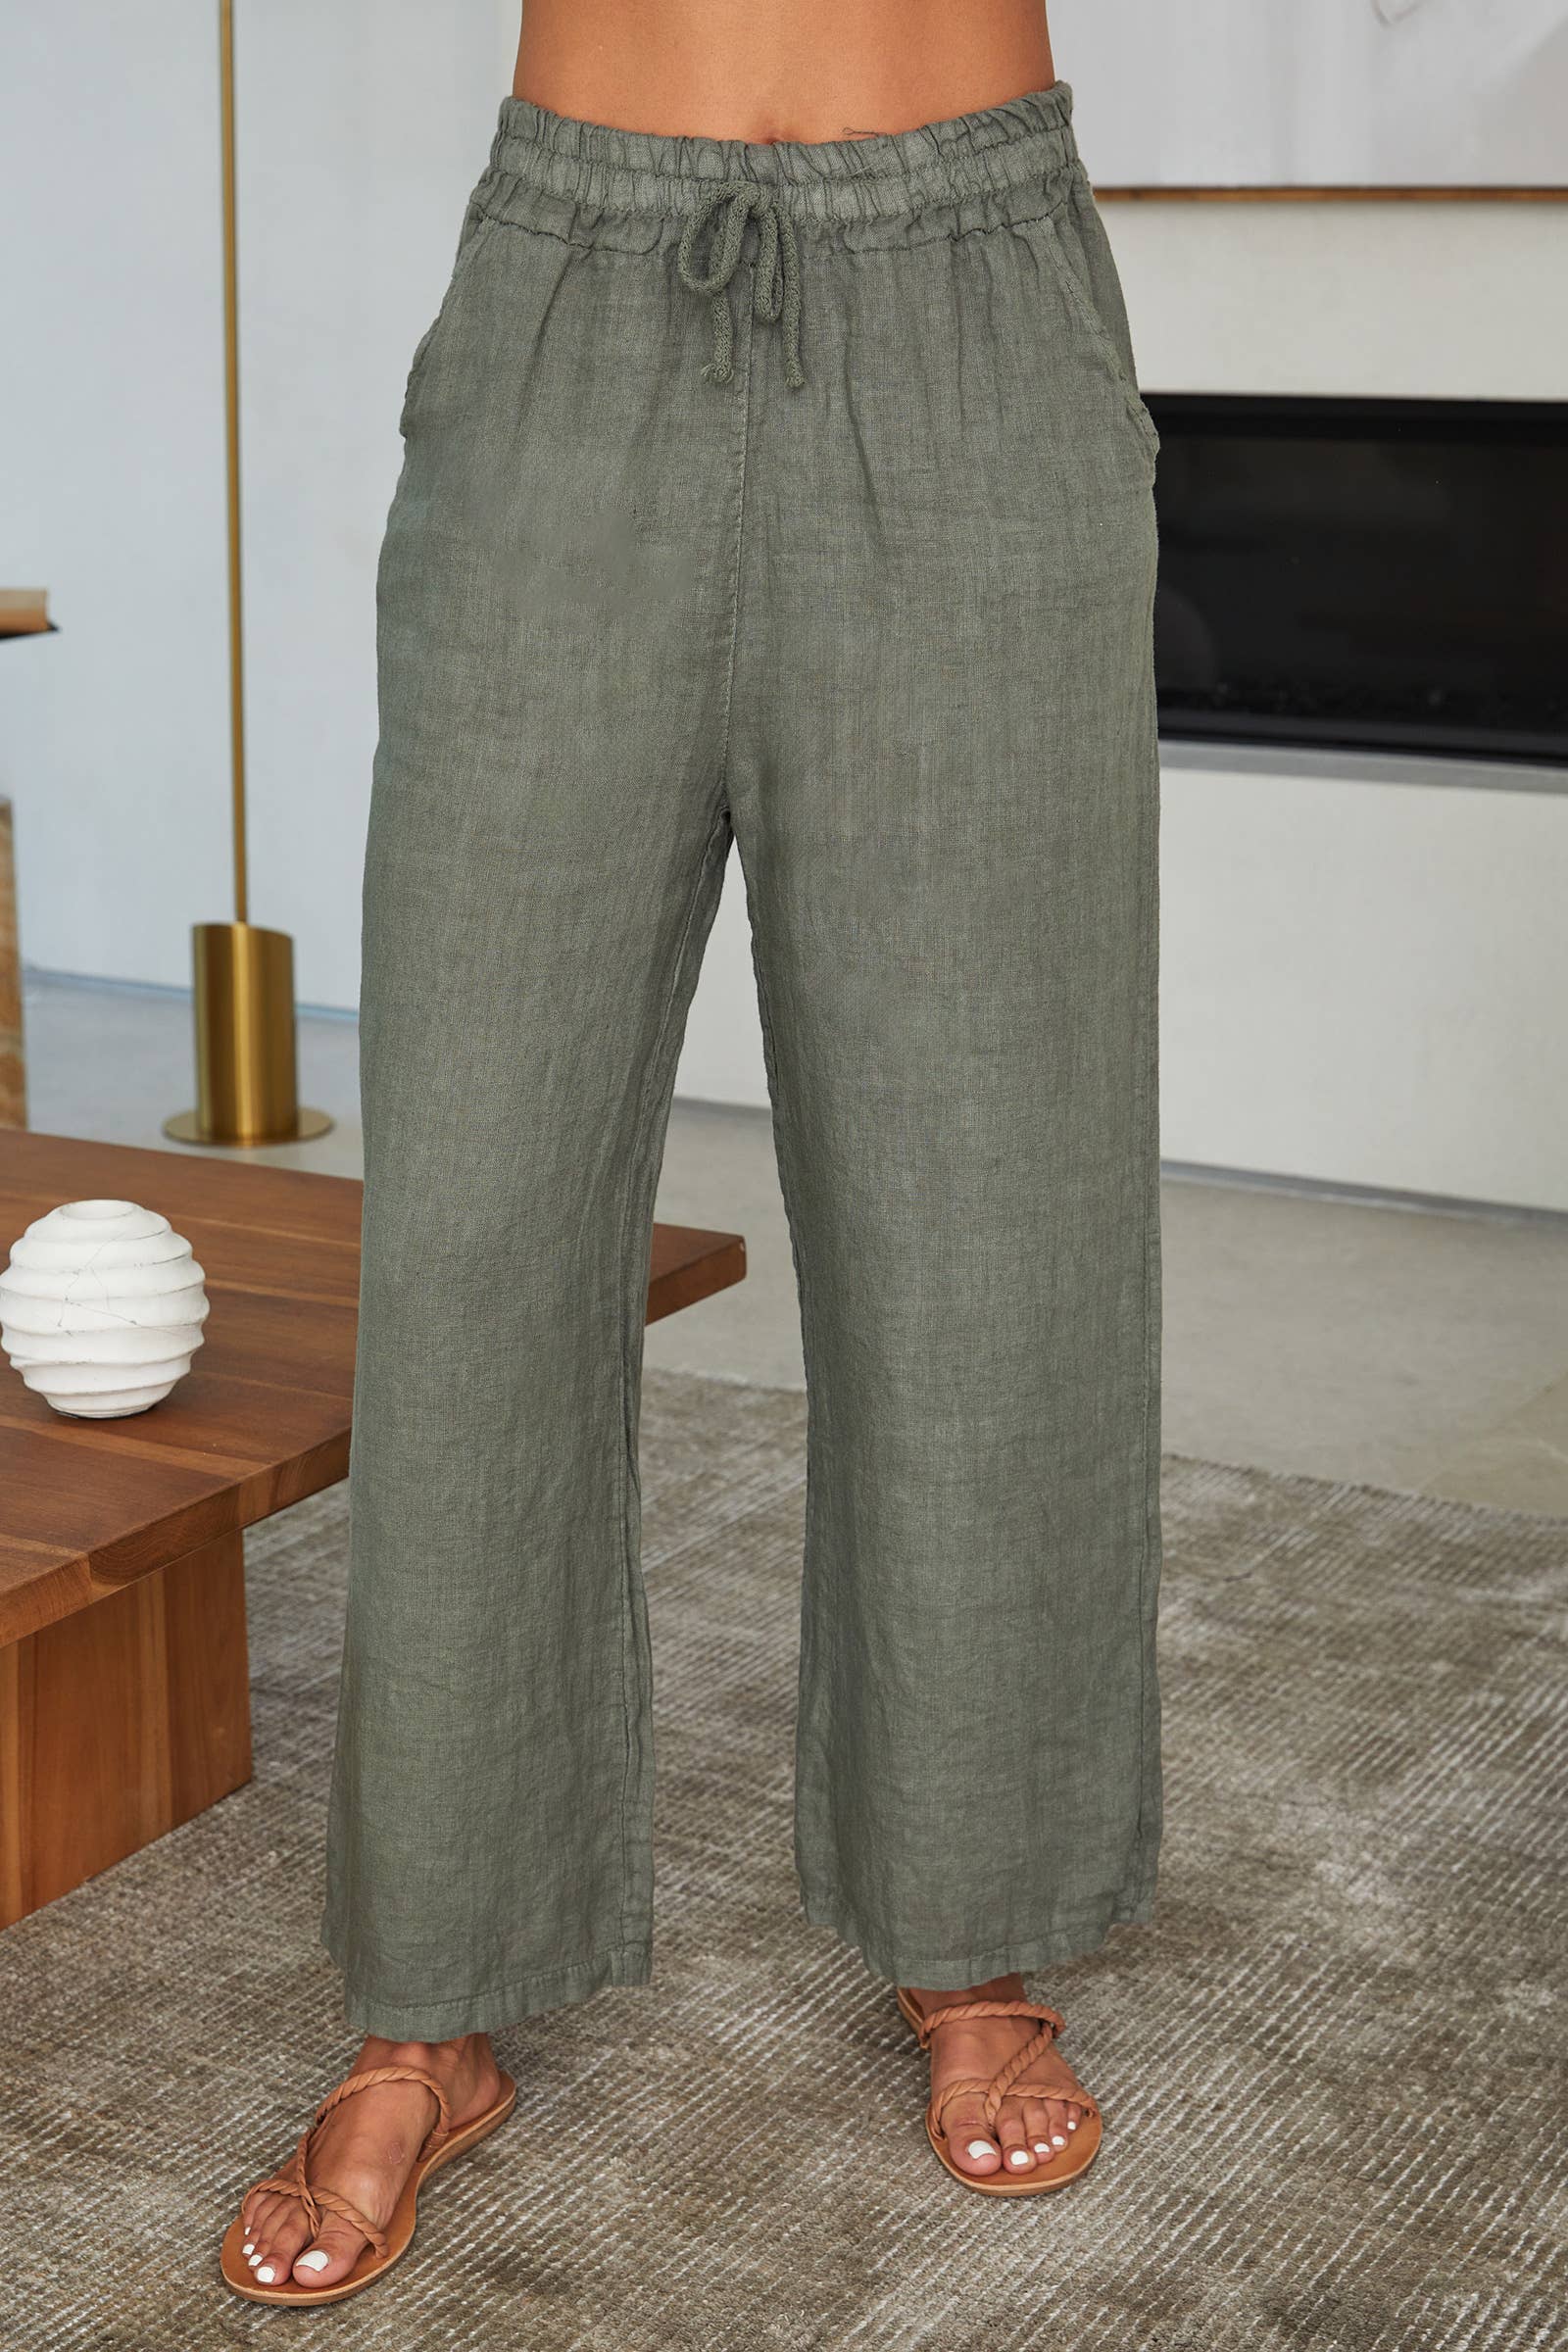 Hawes & Curtis Cream Linen Tailored Italian Suit Trousers - 1913 Collection  | £150.00 | Port